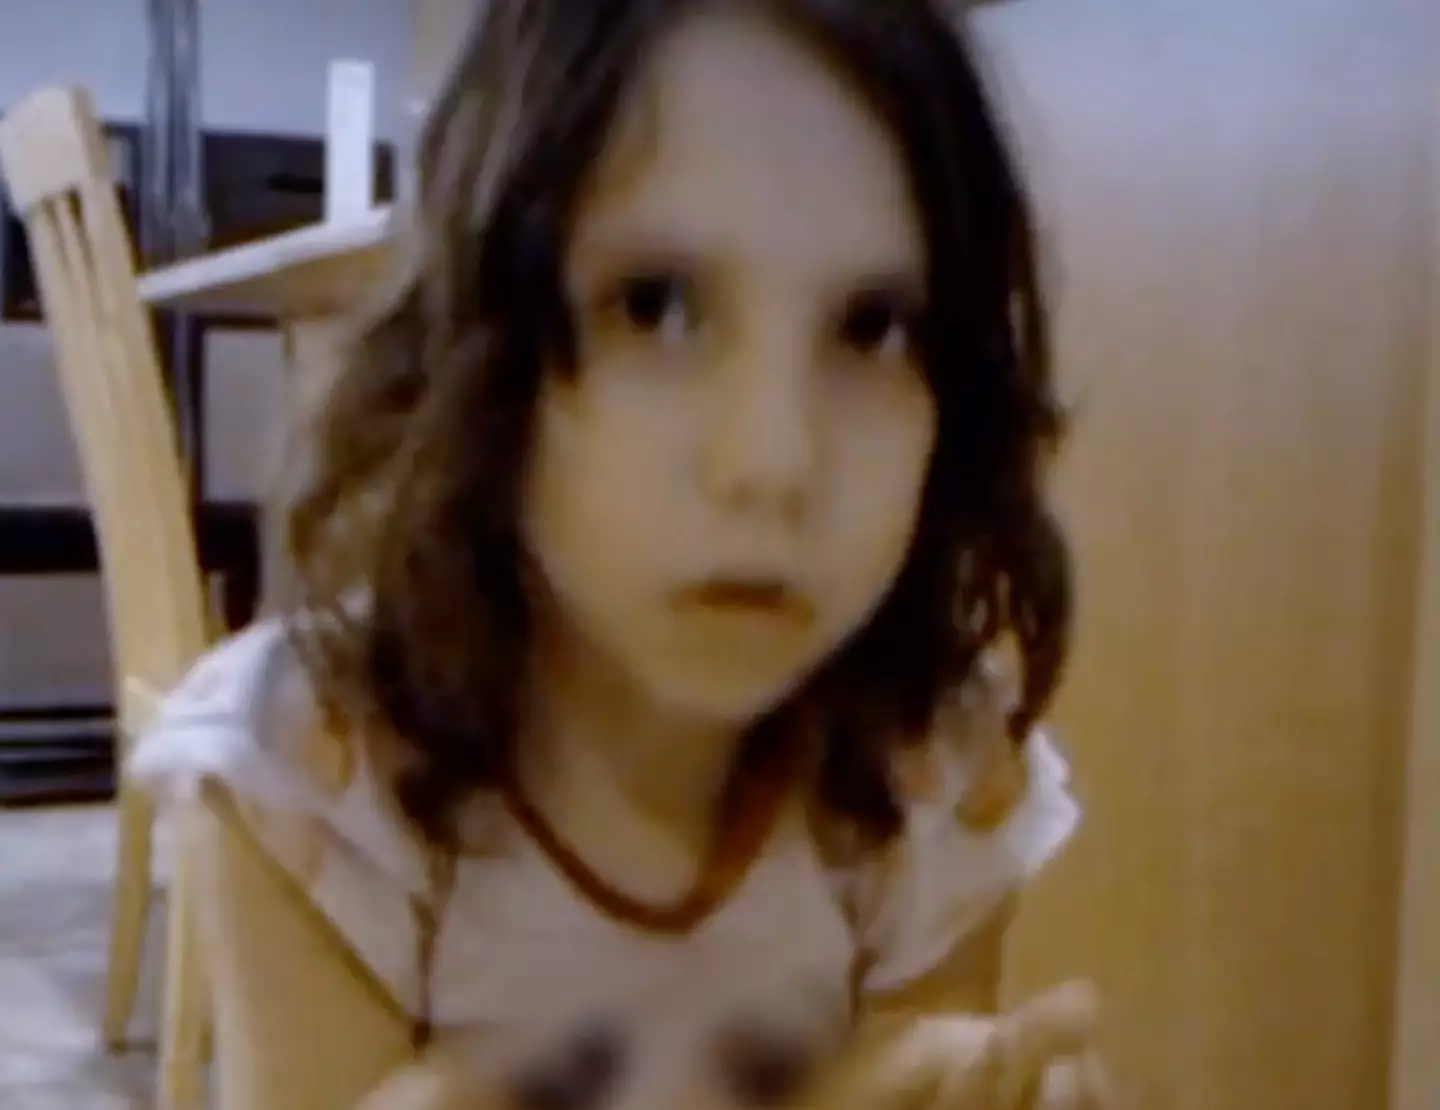 A home video shows Kristine asking Natalia to explain to her dad ‘what happened’.